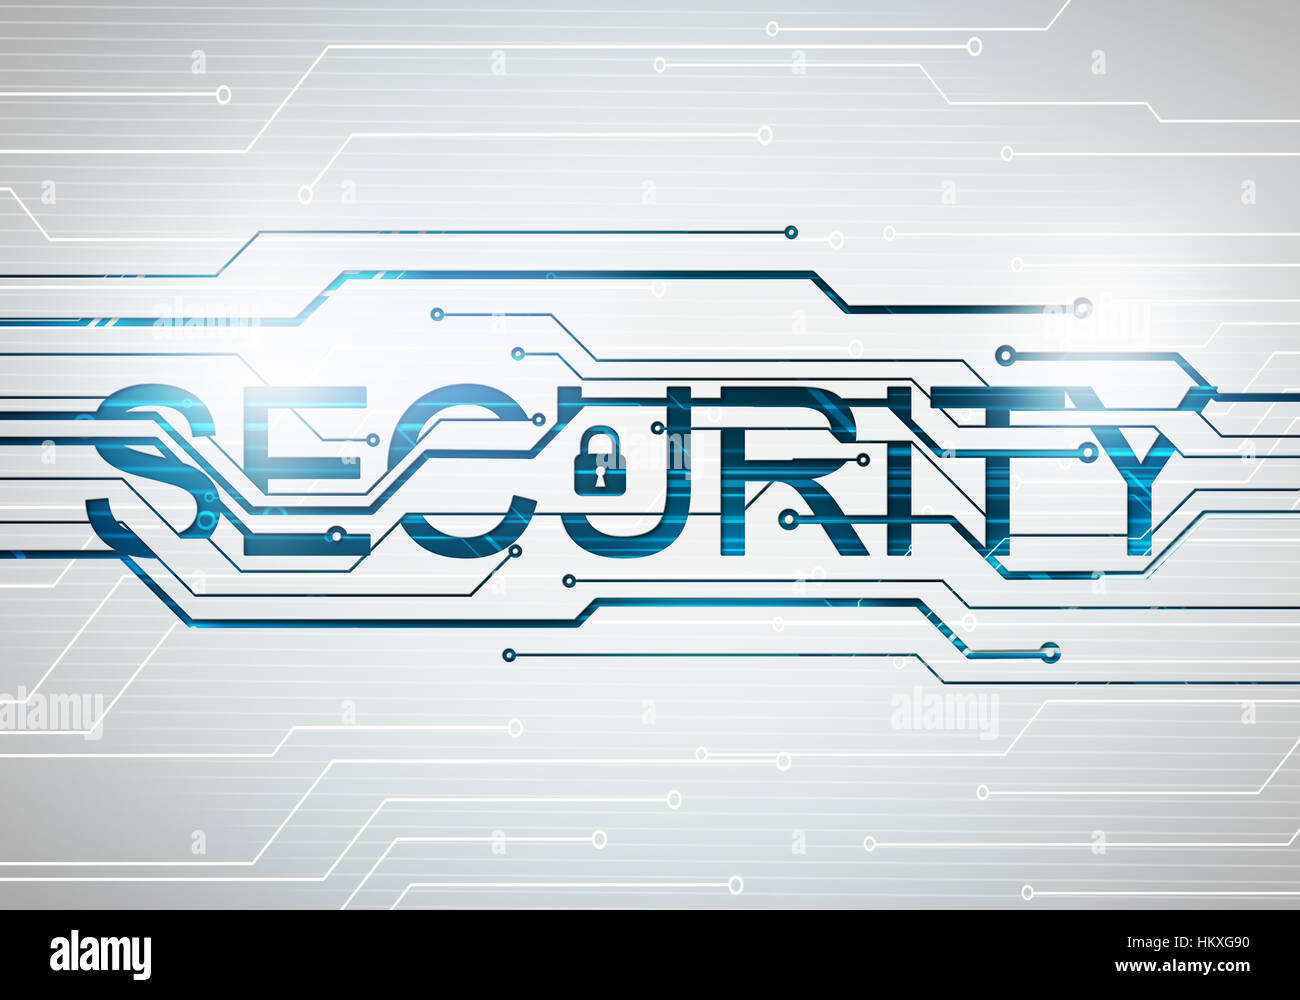 Abstract digital concept of internet security and safety on circuit microchip background. For branding, graphic design, wallpaper. Stock Photo